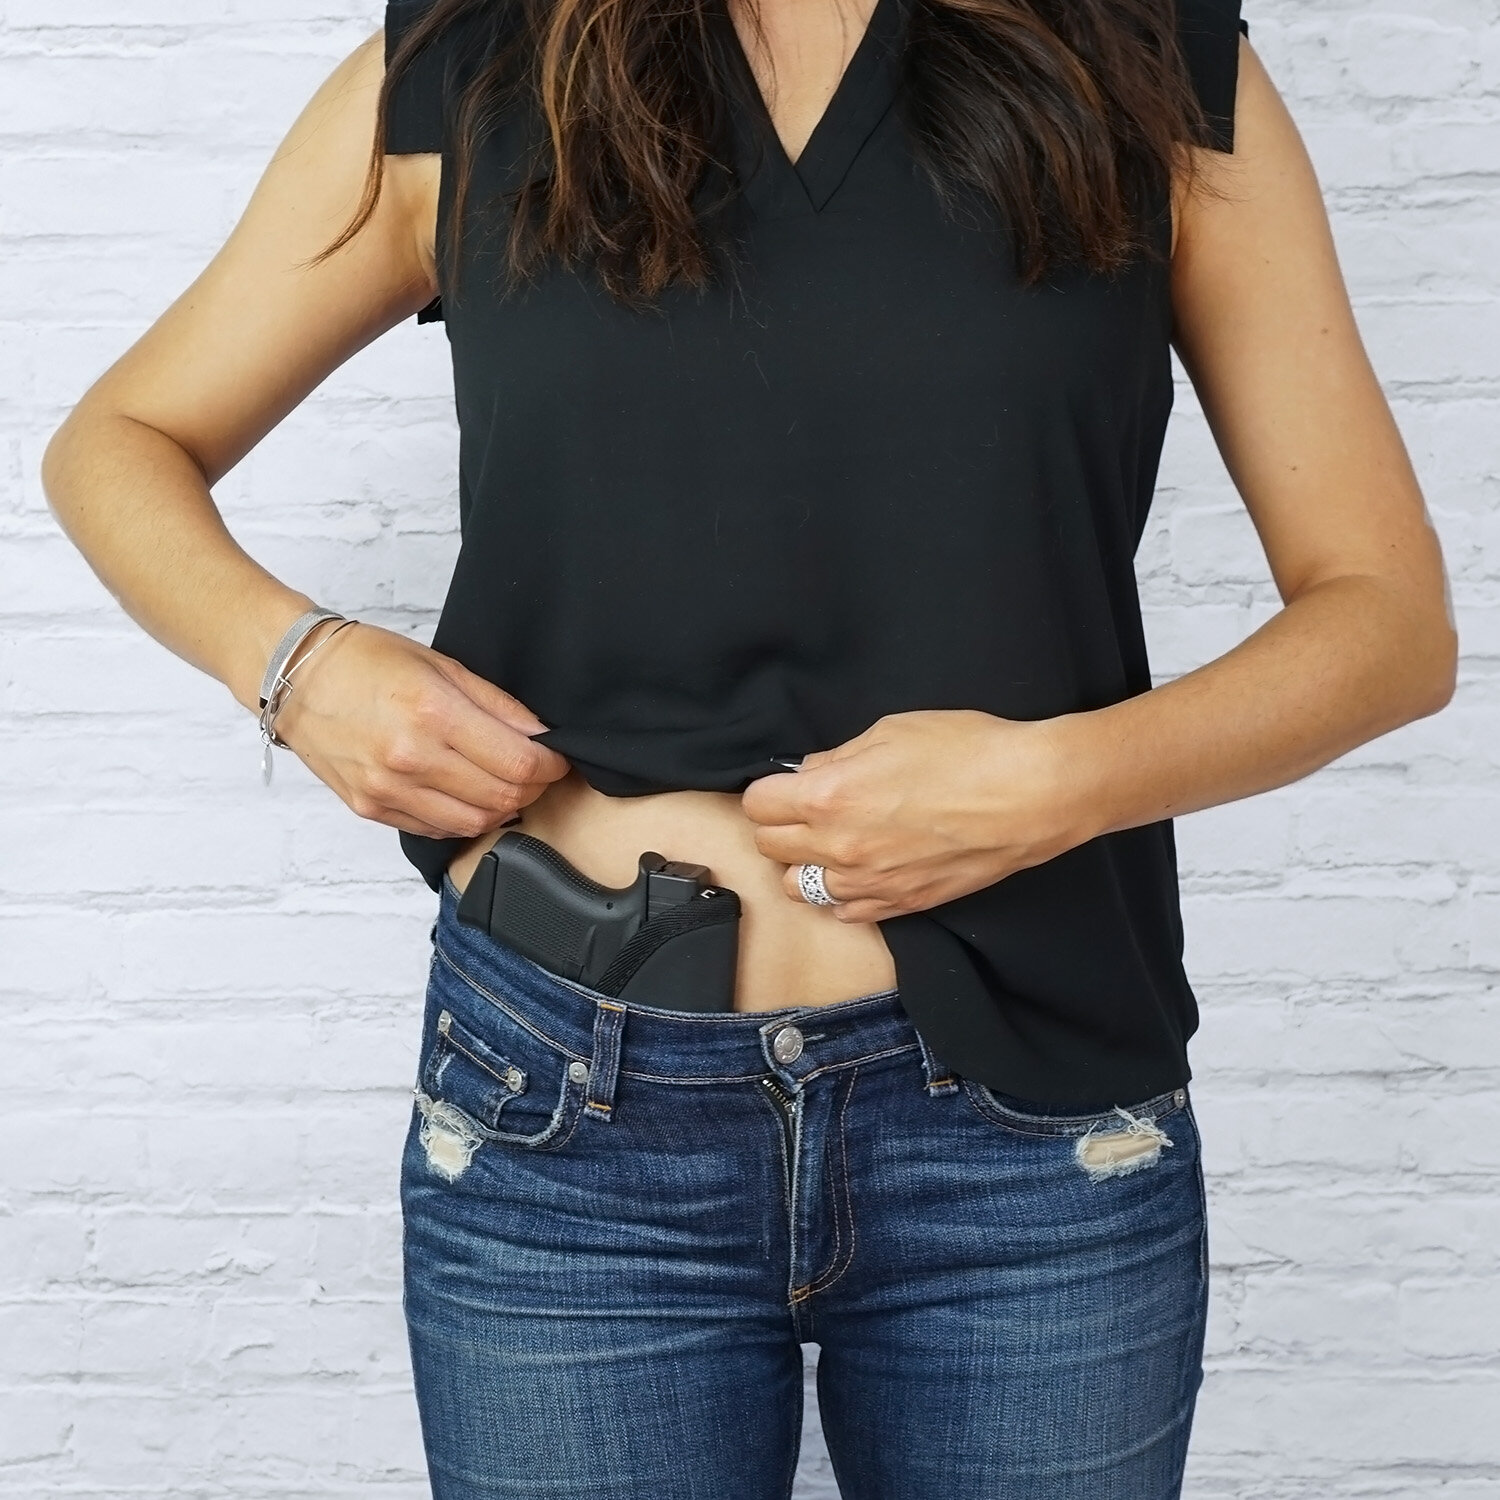 Best Beltless Concealed Carry Holsters for Women